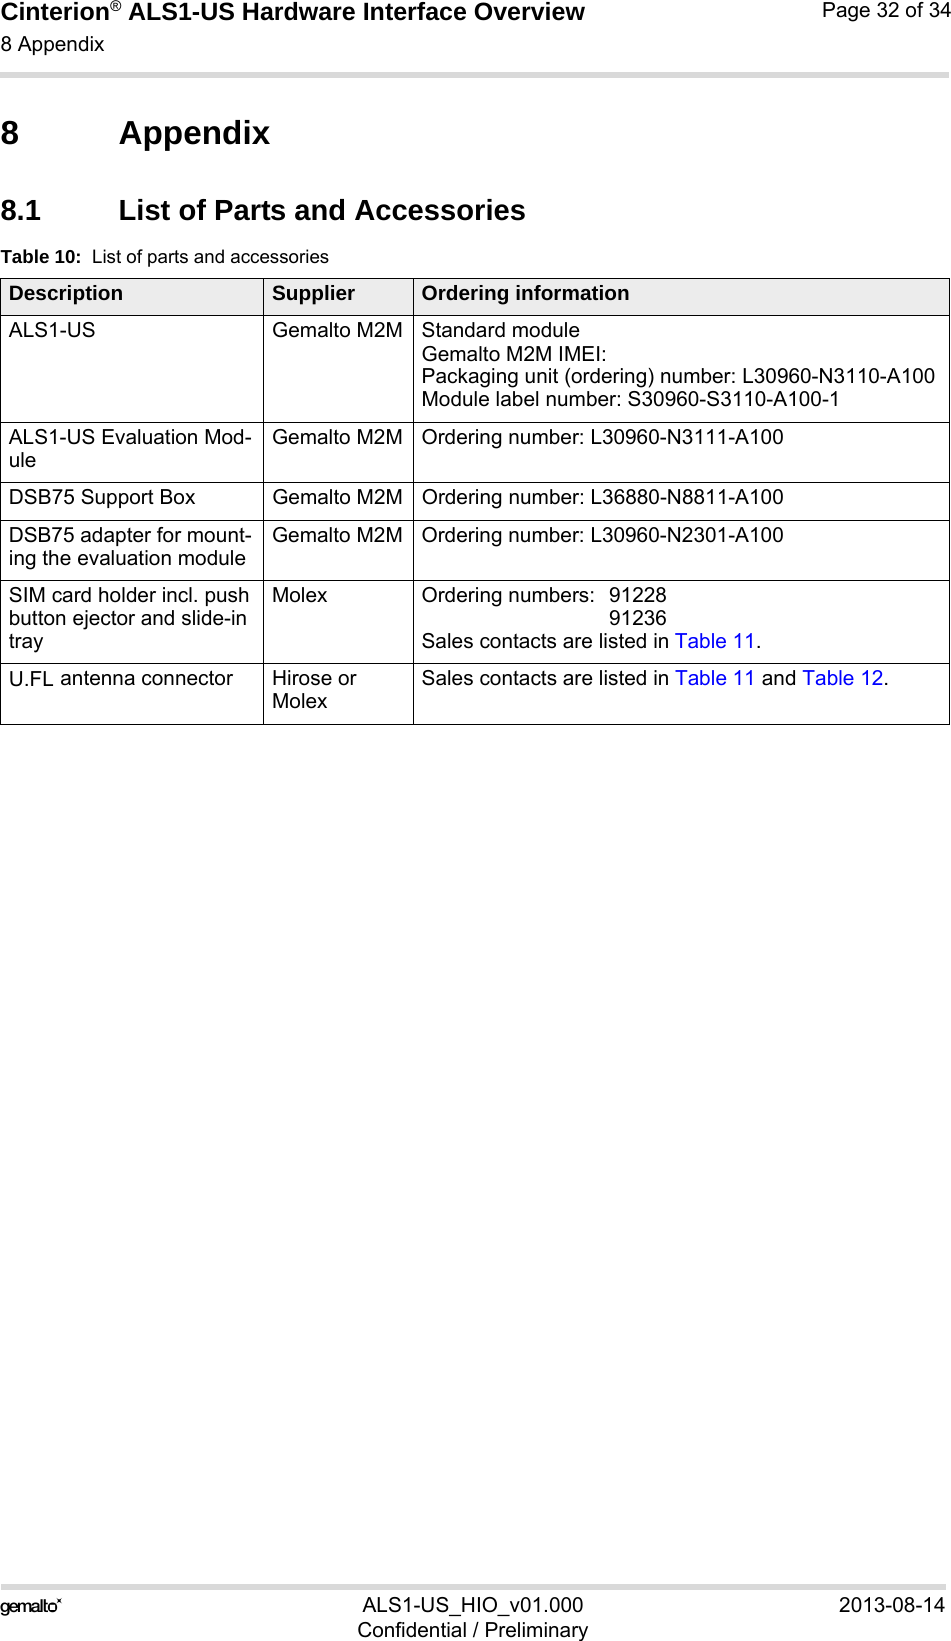 Cinterion® ALS1-US Hardware Interface Overview8 Appendix33ALS1-US_HIO_v01.000 2013-08-14Confidential / PreliminaryPage 32 of 348 Appendix8.1 List of Parts and AccessoriesTable 10:  List of parts and accessoriesDescription Supplier Ordering informationALS1-US Gemalto M2M Standard module Gemalto M2M IMEI:Packaging unit (ordering) number: L30960-N3110-A100Module label number: S30960-S3110-A100-1ALS1-US Evaluation Mod-uleGemalto M2M Ordering number: L30960-N3111-A100DSB75 Support Box Gemalto M2M Ordering number: L36880-N8811-A100DSB75 adapter for mount-ing the evaluation moduleGemalto M2M Ordering number: L30960-N2301-A100SIM card holder incl. push button ejector and slide-in trayMolex Ordering numbers:  91228 91236Sales contacts are listed in Table 11.U.FL antenna connector Hirose or MolexSales contacts are listed in Table 11 and Table 12.